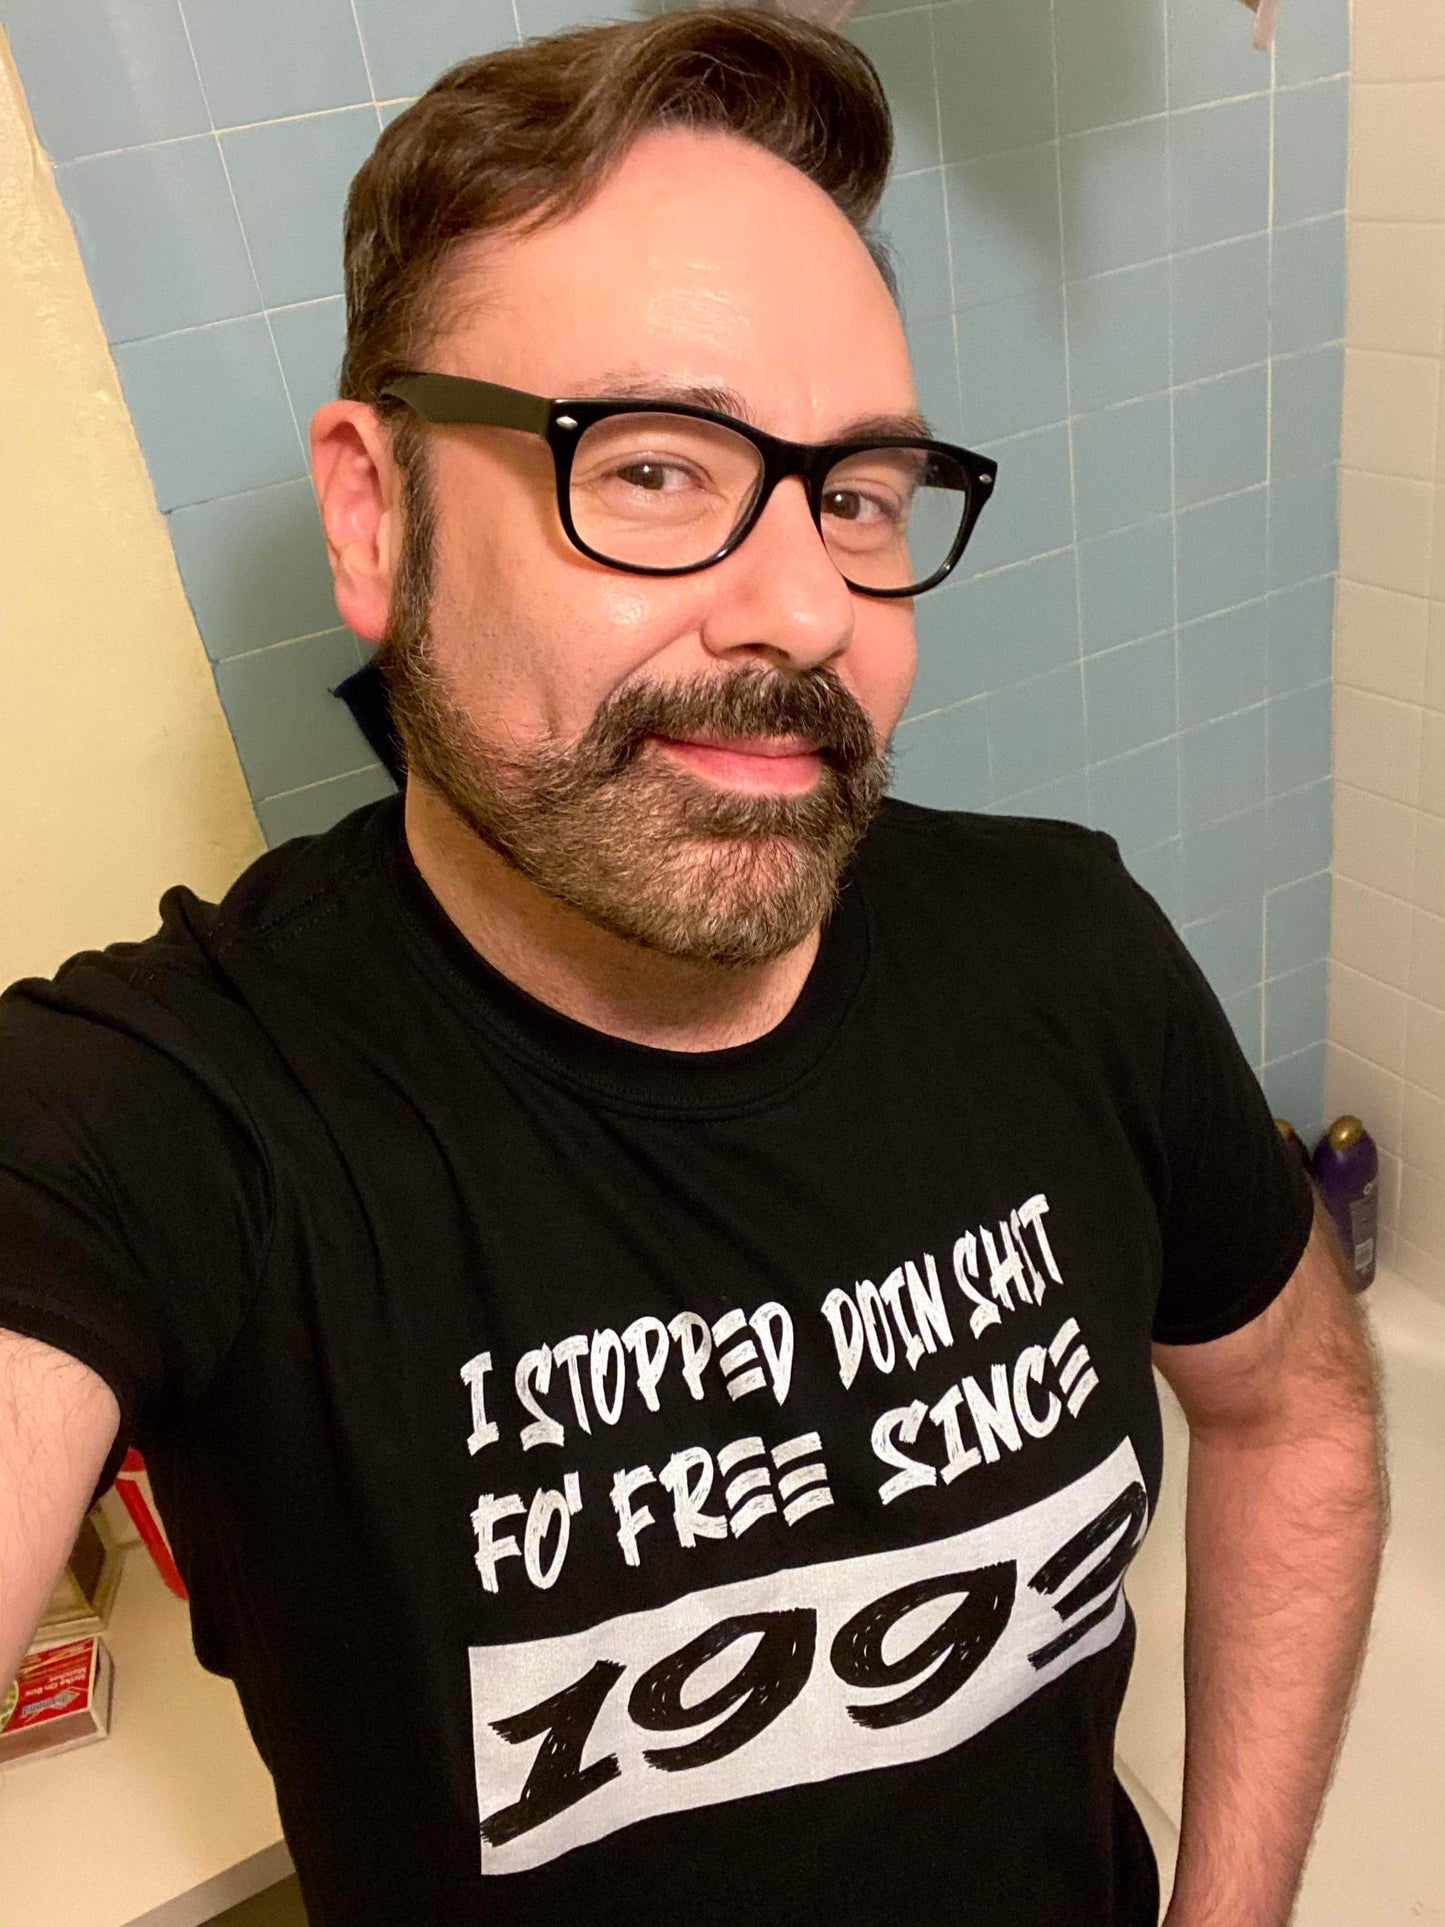 I STOPPED DOING SHIT FOR FREE SINCE 1993 T-SHIRT